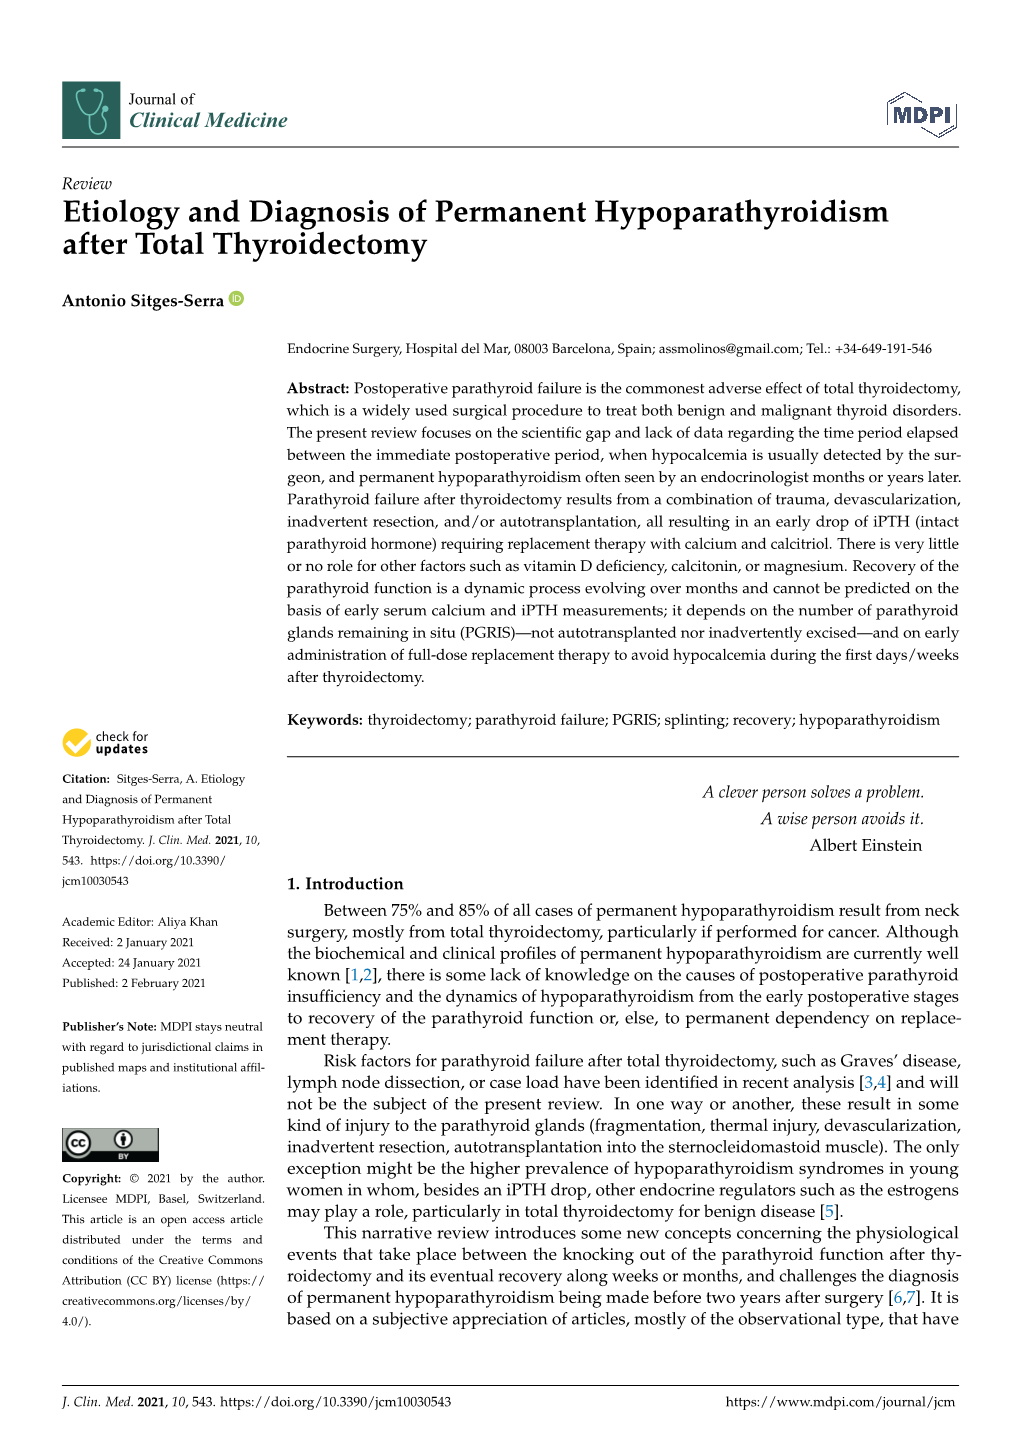 Etiology and Diagnosis of Permanent Hypoparathyroidism After Total Thyroidectomy